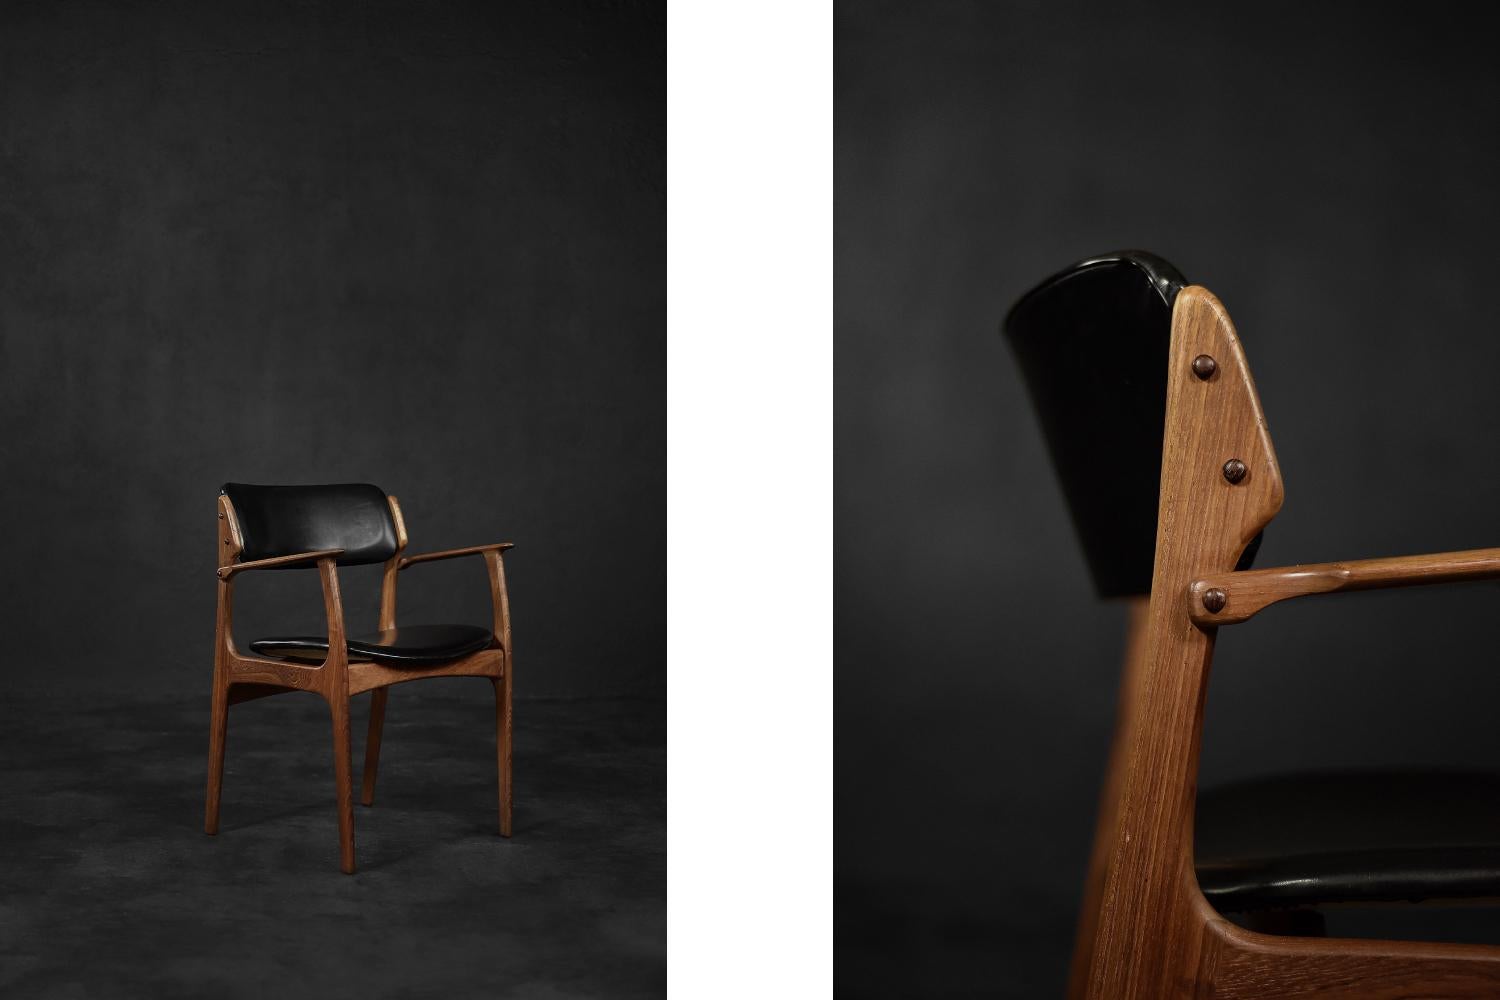 This model 50 office armchair was designed by Erik Buch for the Danish manufactory Oddense Maskinsnedkeri during the 1950s. The sculptured frame of the armchair is made of dark brown teak wood. The seat and backrest are upholstered in black vinyl.